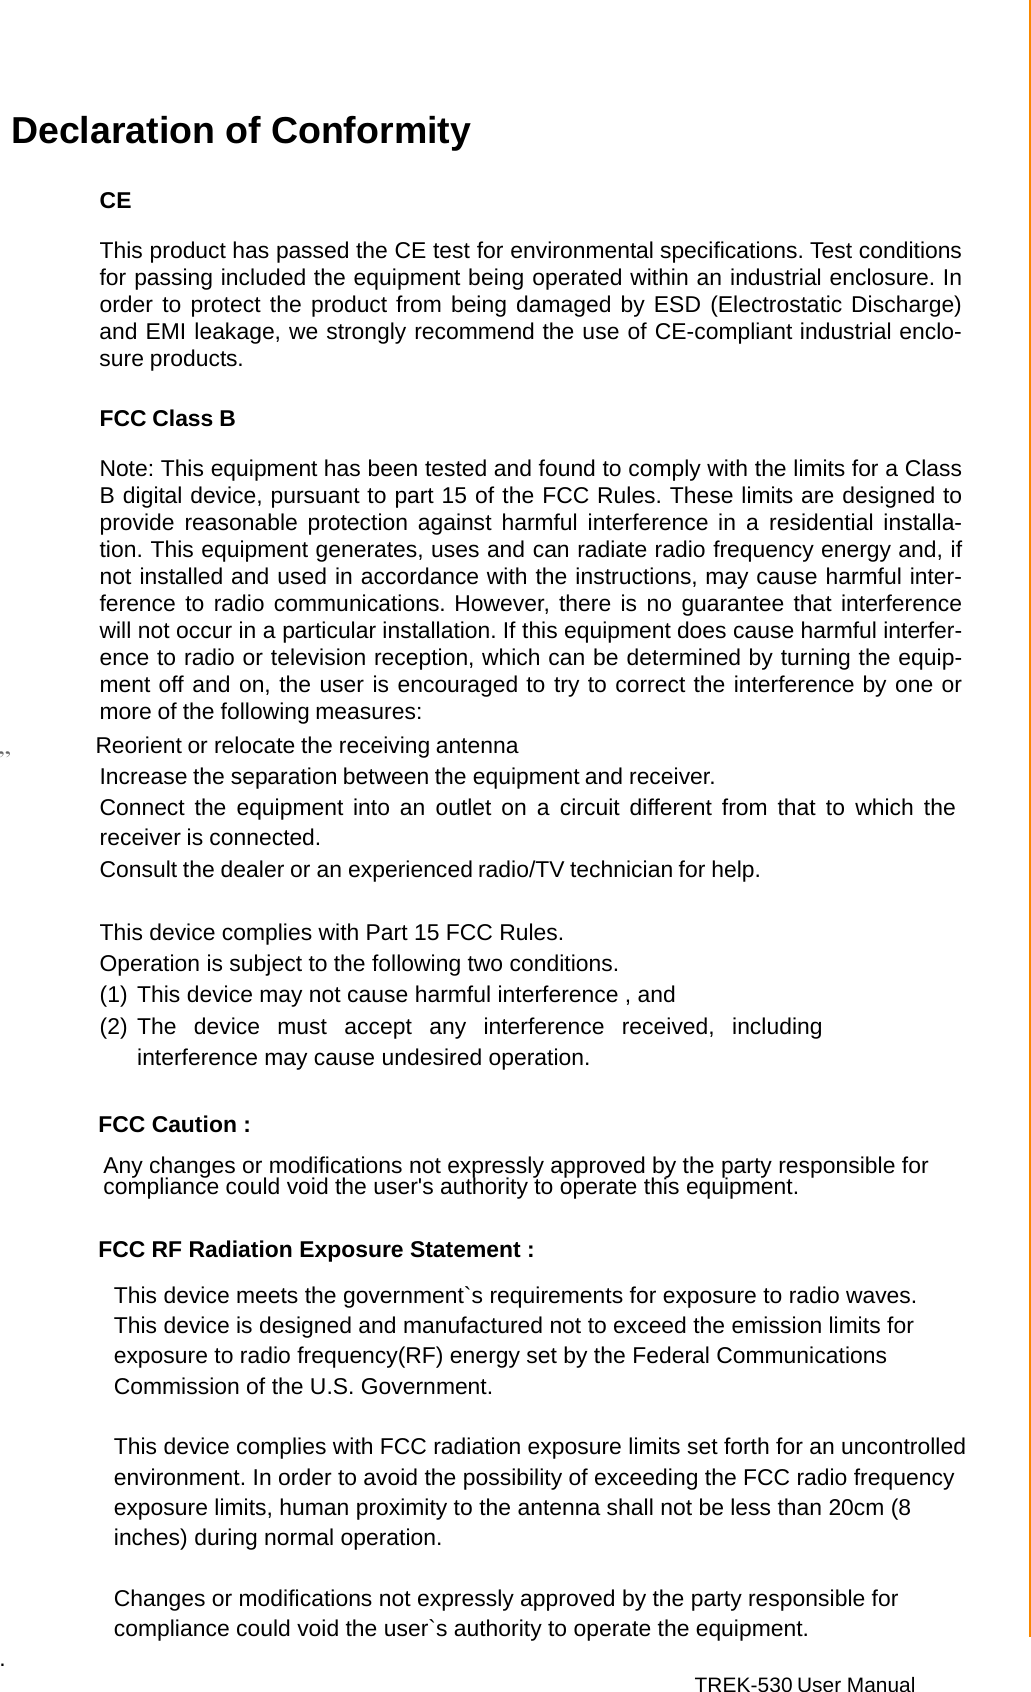 TREK-530 User Manual  Declaration of Conformity   CE  This product has passed the CE test for environmental specifications. Test conditions for passing included the equipment being operated within an industrial enclosure. In order to protect the product from being damaged by ESD (Electrostatic Discharge) and EMI leakage, we strongly recommend the use of CE-compliant industrial enclo- sure products.   FCC Class B  Note: This equipment has been tested and found to comply with the limits for a Class B digital device, pursuant to part 15 of the FCC Rules. These limits are designed to provide  reasonable  protection against  harmful interference in  a  residential installa- tion. This equipment generates, uses and can radiate radio frequency energy and, if not installed and used in accordance with the instructions, may cause harmful inter- ference to radio communications. However, there is no guarantee that interference will not occur in a particular installation. If this equipment does cause harmful interfer- ence to radio or television reception, which can be determined by turning the equip- ment off and on, the user is encouraged to try to correct the interference by one or more of the following measures: „         Reorient or relocate the receiving antenna  Increase the separation between the equipment and receiver. Connect the  equipment into an  outlet on  a  circuit  different from  that to which the receiver is connected. Consult the dealer or an experienced radio/TV technician for help.  This device complies with Part 15 FCC Rules. Operation is subject to the following two conditions. (1) This device may not cause harmful interference , and (2) The device must accept any interference received, including interference may cause undesired operation.         FCC Caution :   Any changes or modifications not expressly approved by the party responsible for compliance could void the user&apos;s authority to operate this equipment.         FCC RF Radiation Exposure Statement :   This device meets the government`s requirements for exposure to radio waves.  This device is designed and manufactured not to exceed the emission limits for exposure to radio frequency(RF) energy set by the Federal Communications Commission of the U.S. Government.    This device complies with FCC radiation exposure limits set forth for an uncontrolled environment. In order to avoid the possibility of exceeding the FCC radio frequency exposure limits, human proximity to the antenna shall not be less than 20cm (8 inches) during normal operation.  Changes or modifications not expressly approved by the party responsible for compliance could void the user`s authority to operate the equipment. . 